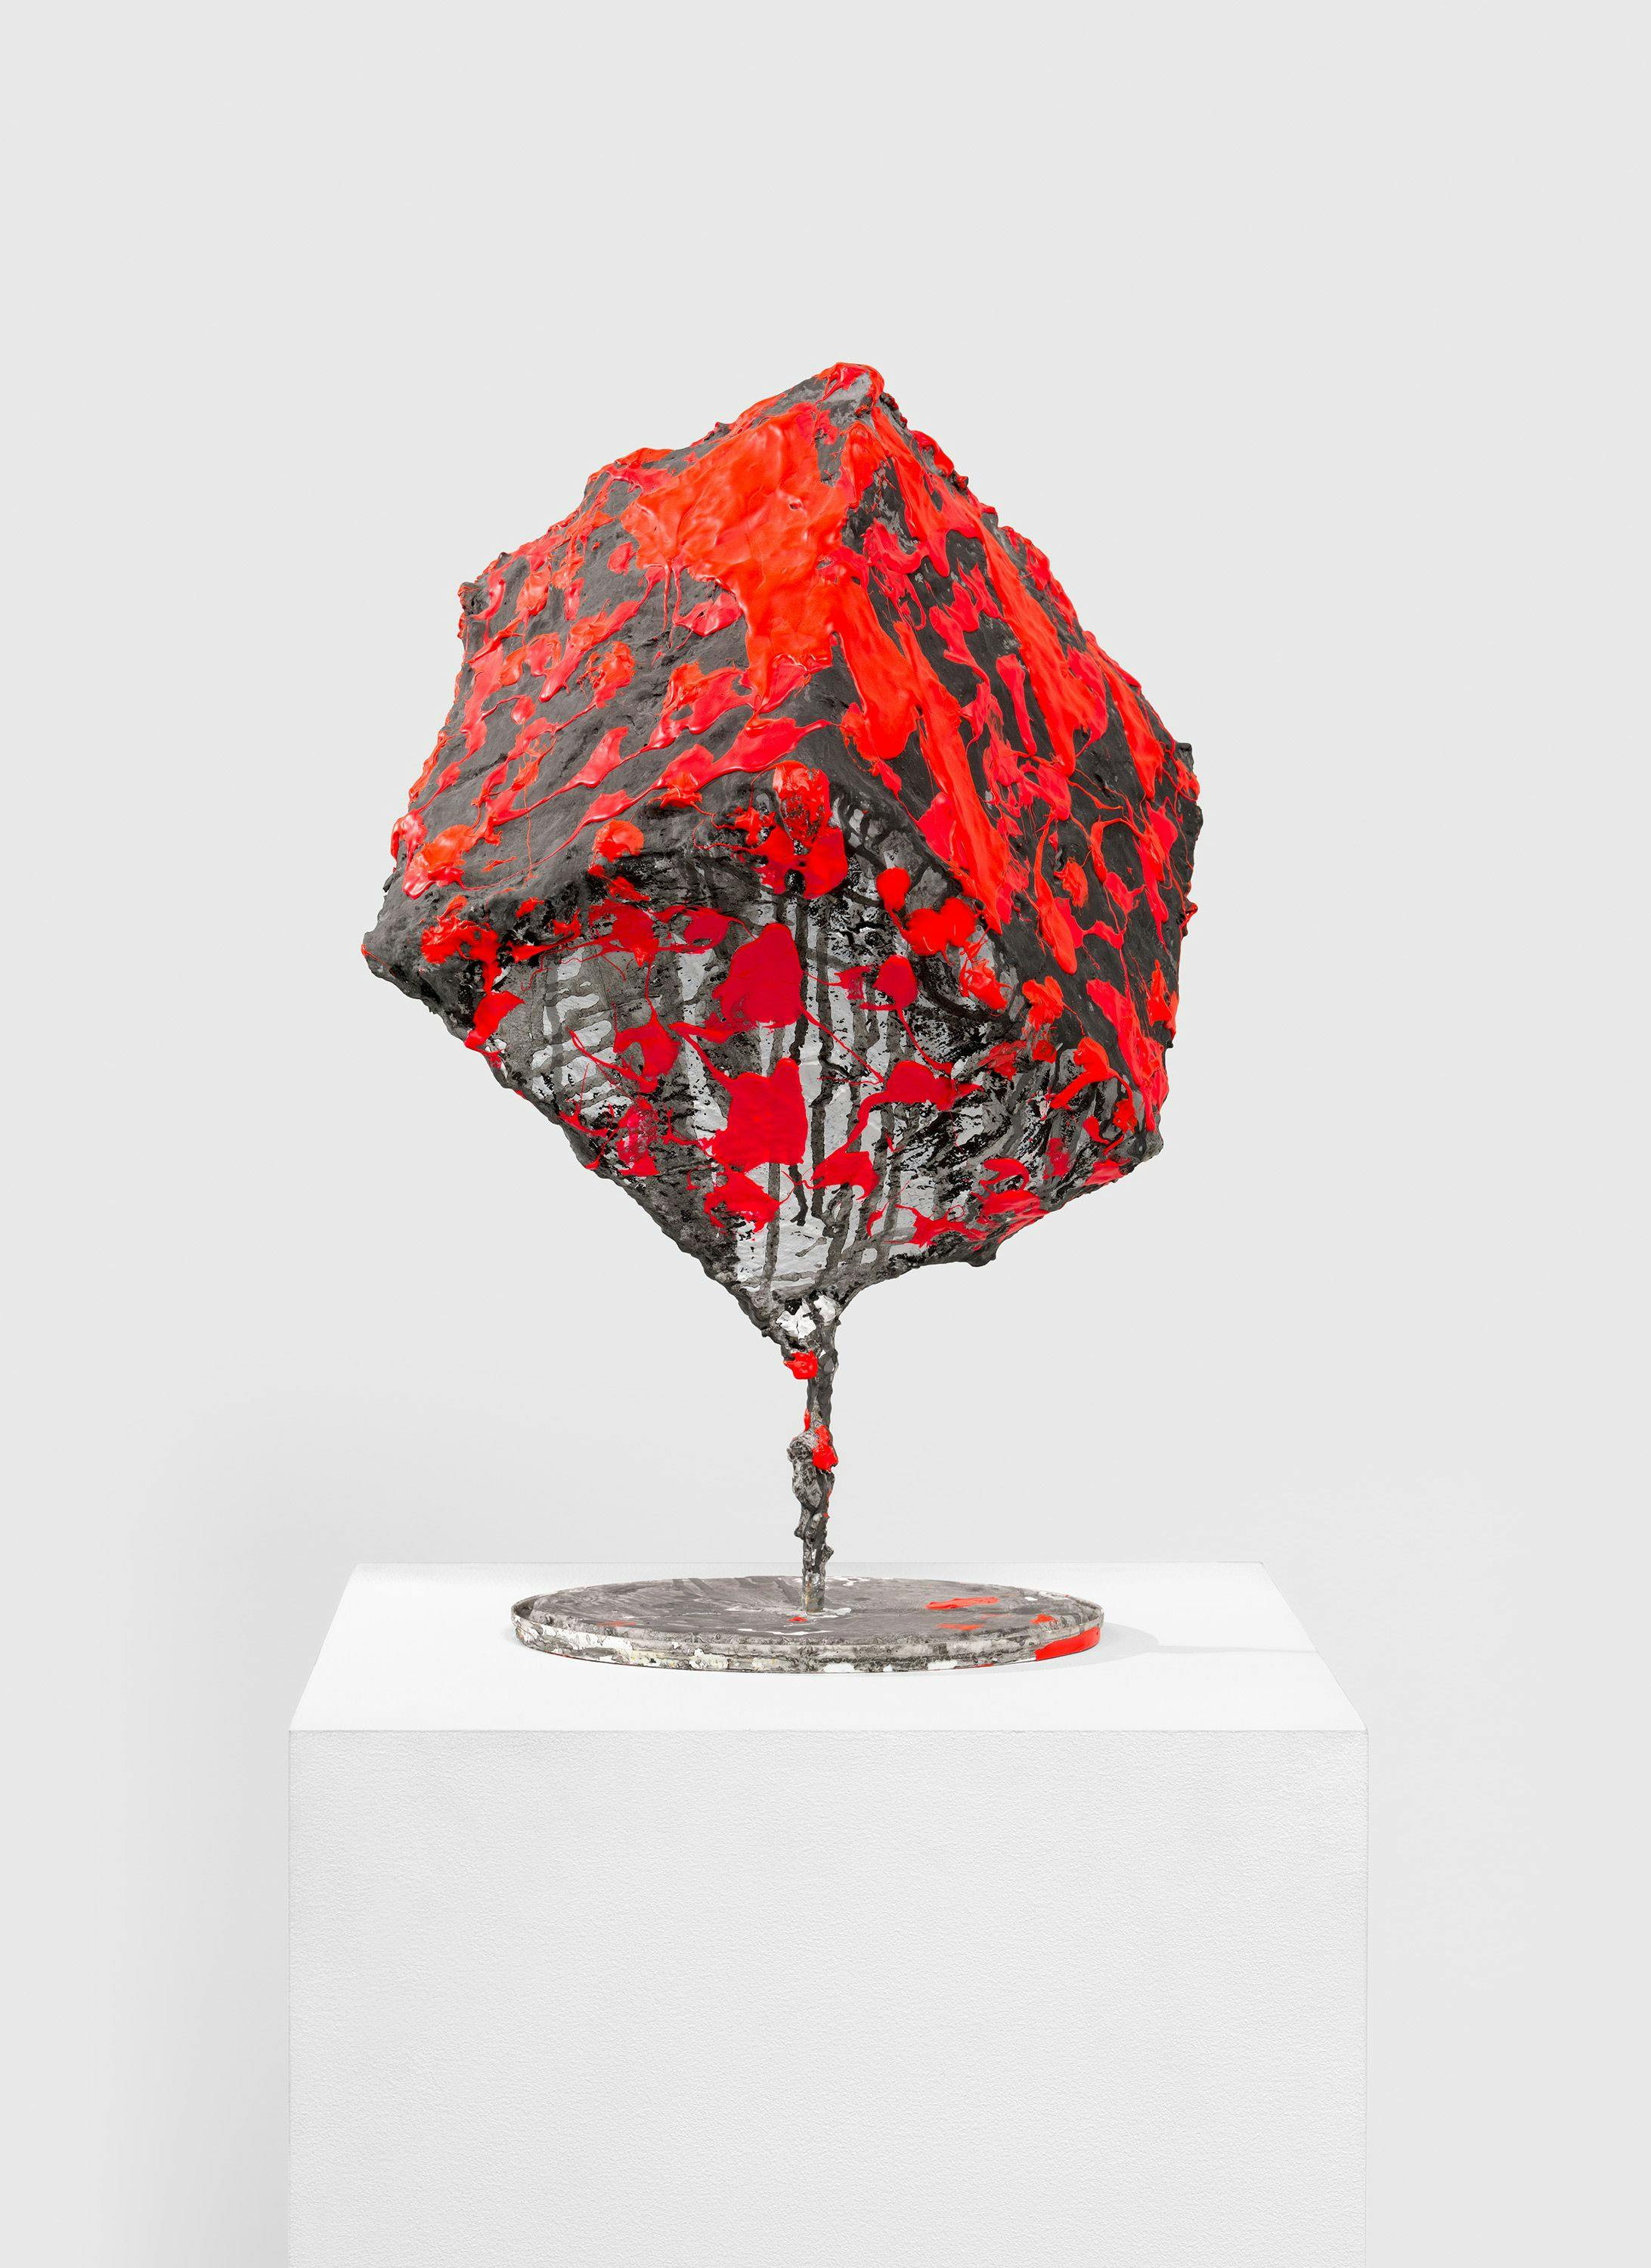 An untitled sculpture by Franz West, dated 1997.